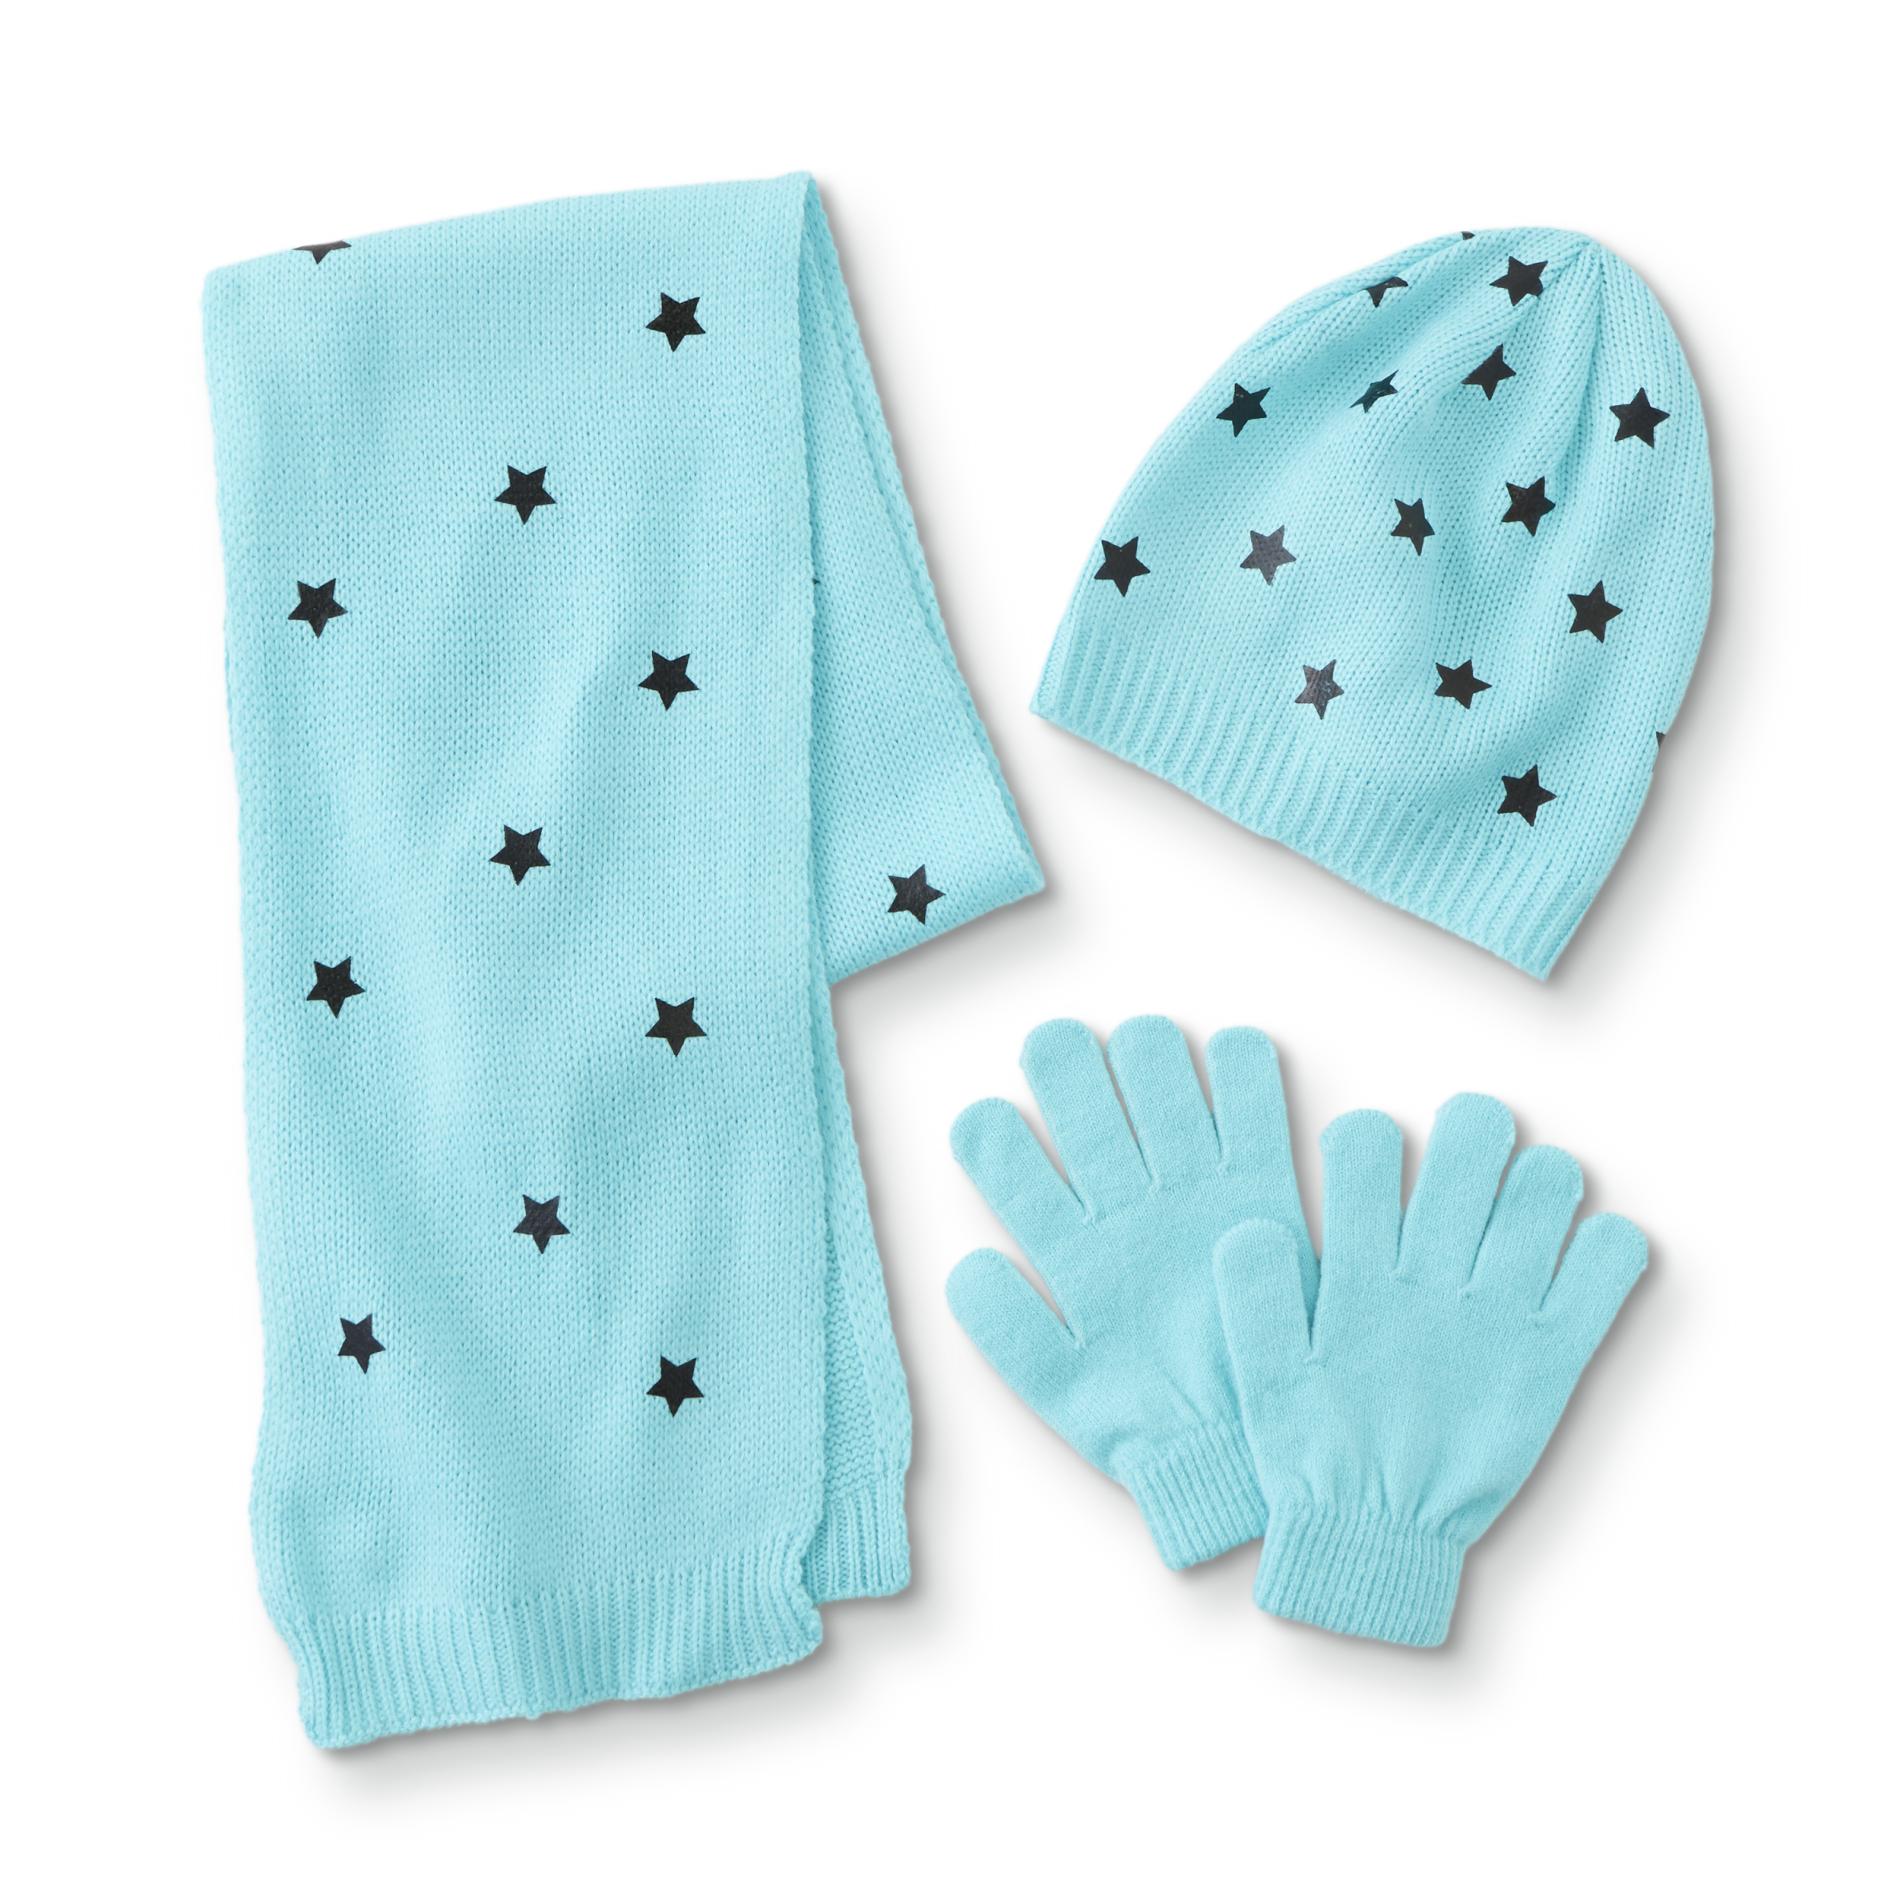 Simply Styled Girls' Hat, Scarf & Gloves - Stars